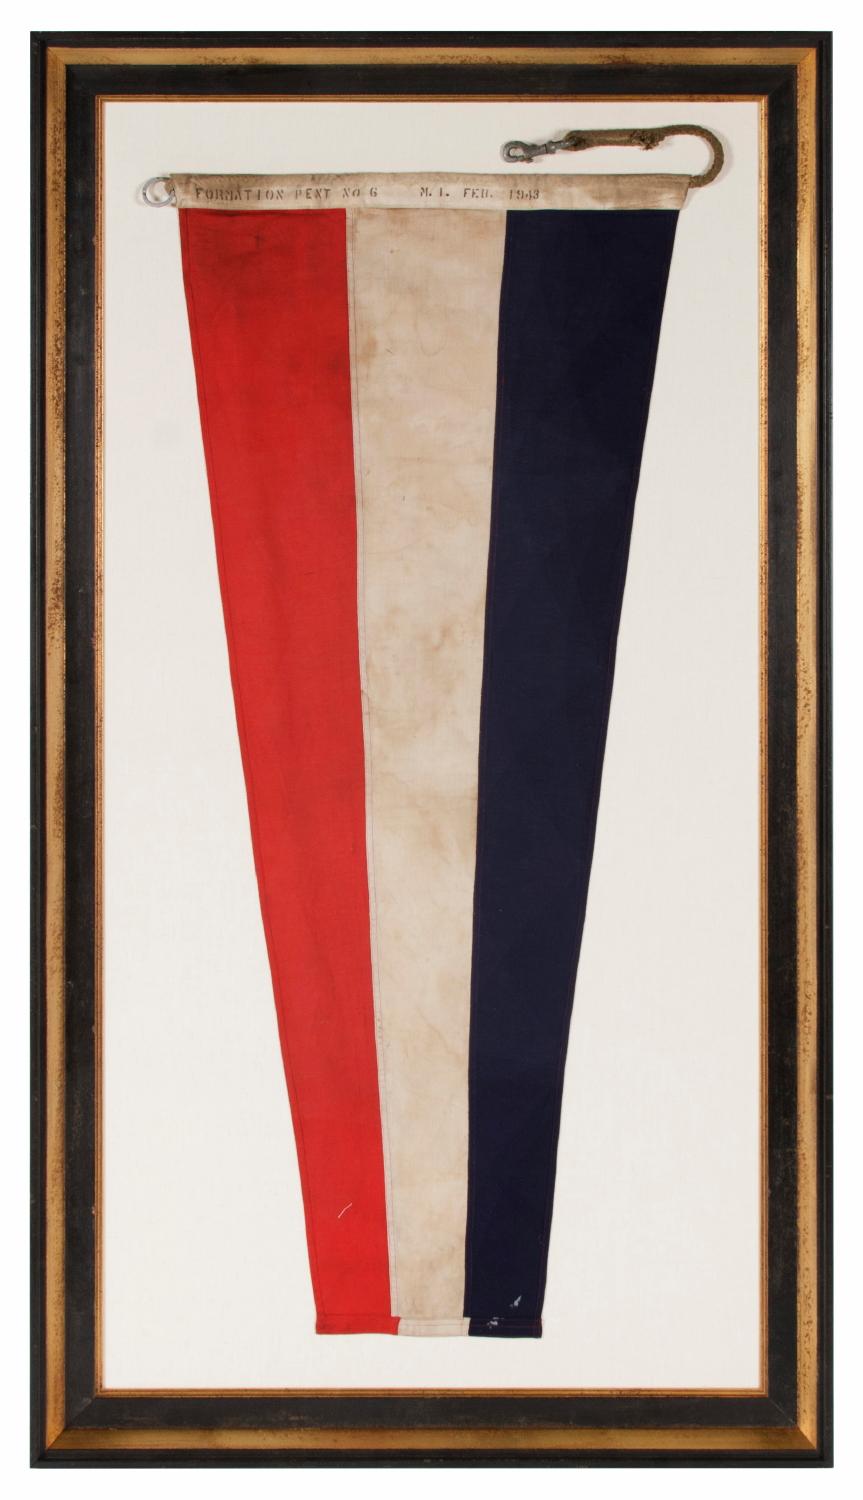 U.S. NAVY FORMATION PENNANT, MADE AT MARE ISLAND, CALIFORNIA DURING WWII, SIGNED AND DATED 1943 

U.S. Navy formation pennant, made during World War II (U.S. involvement 1941-45) and signed along the reverse side of the hoist with a black stencil